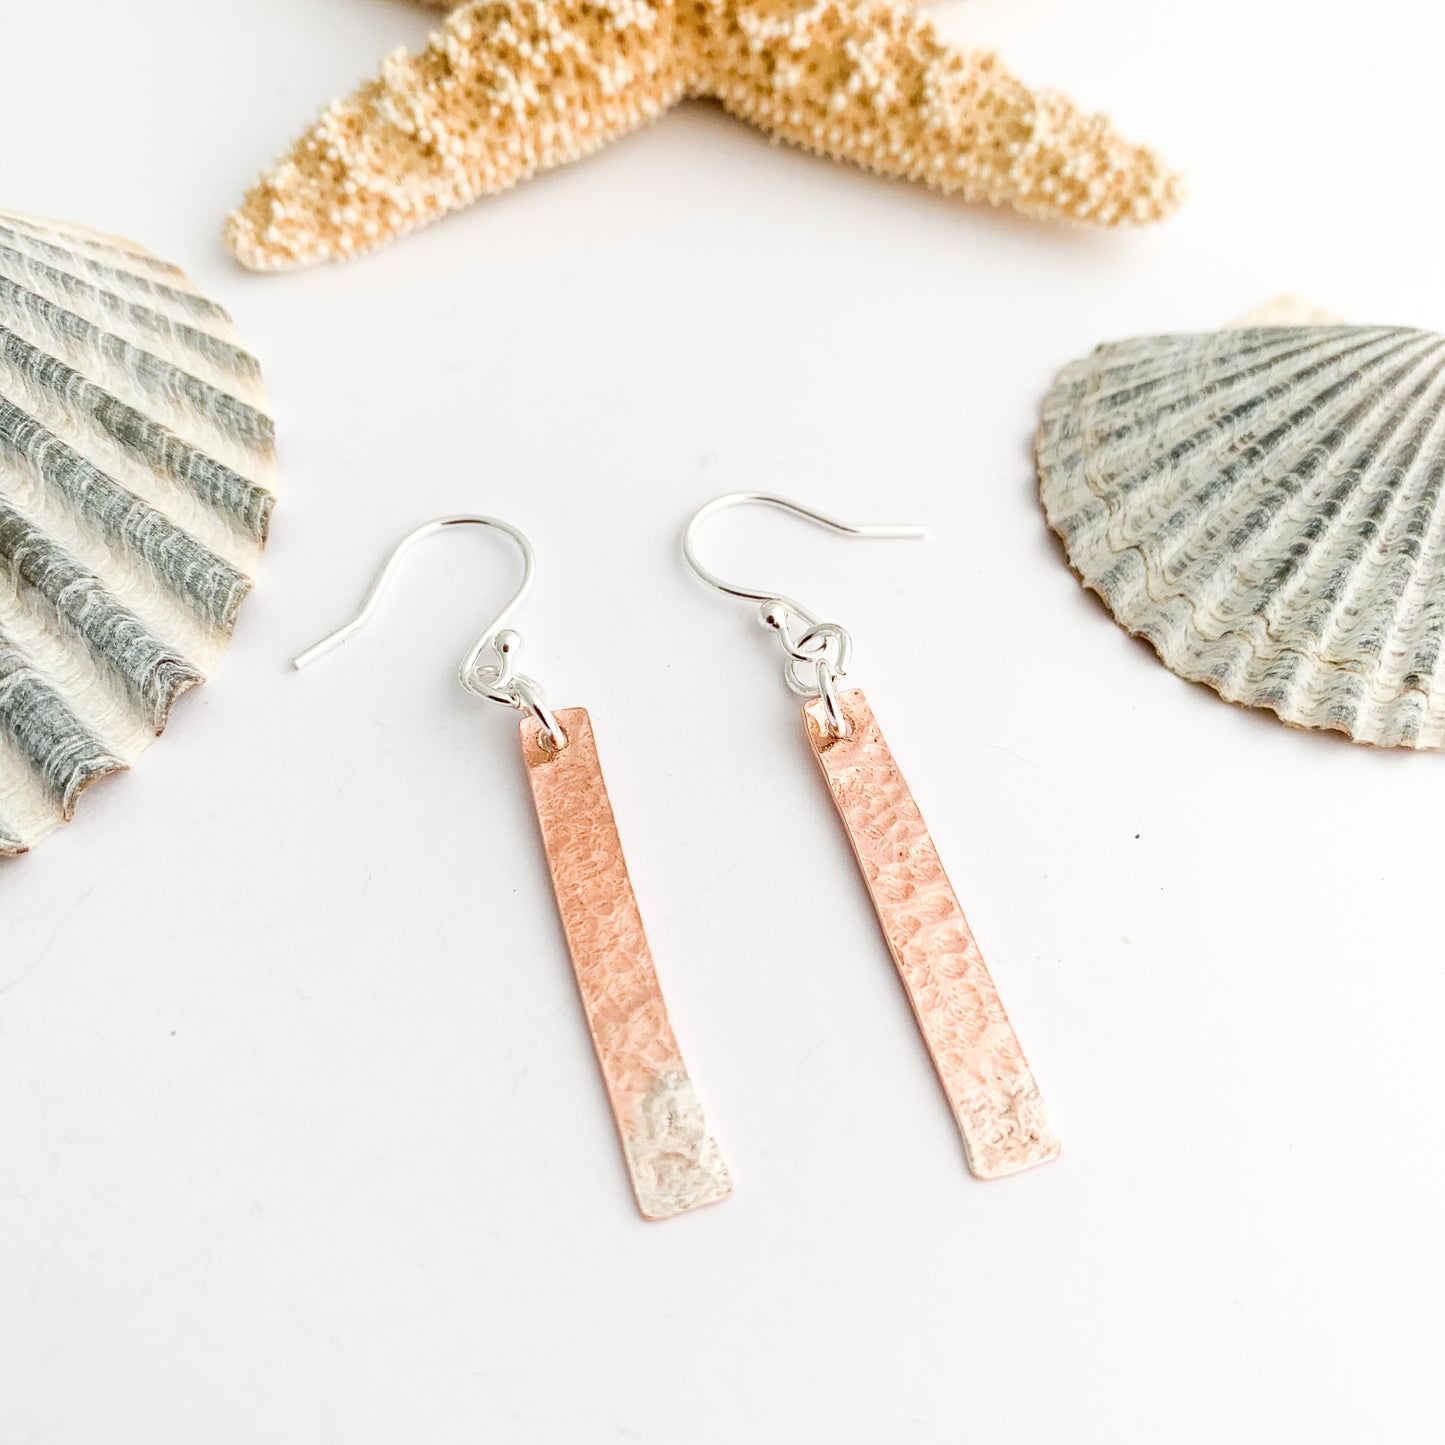 Copper and Sterling Silver Stick Earrings